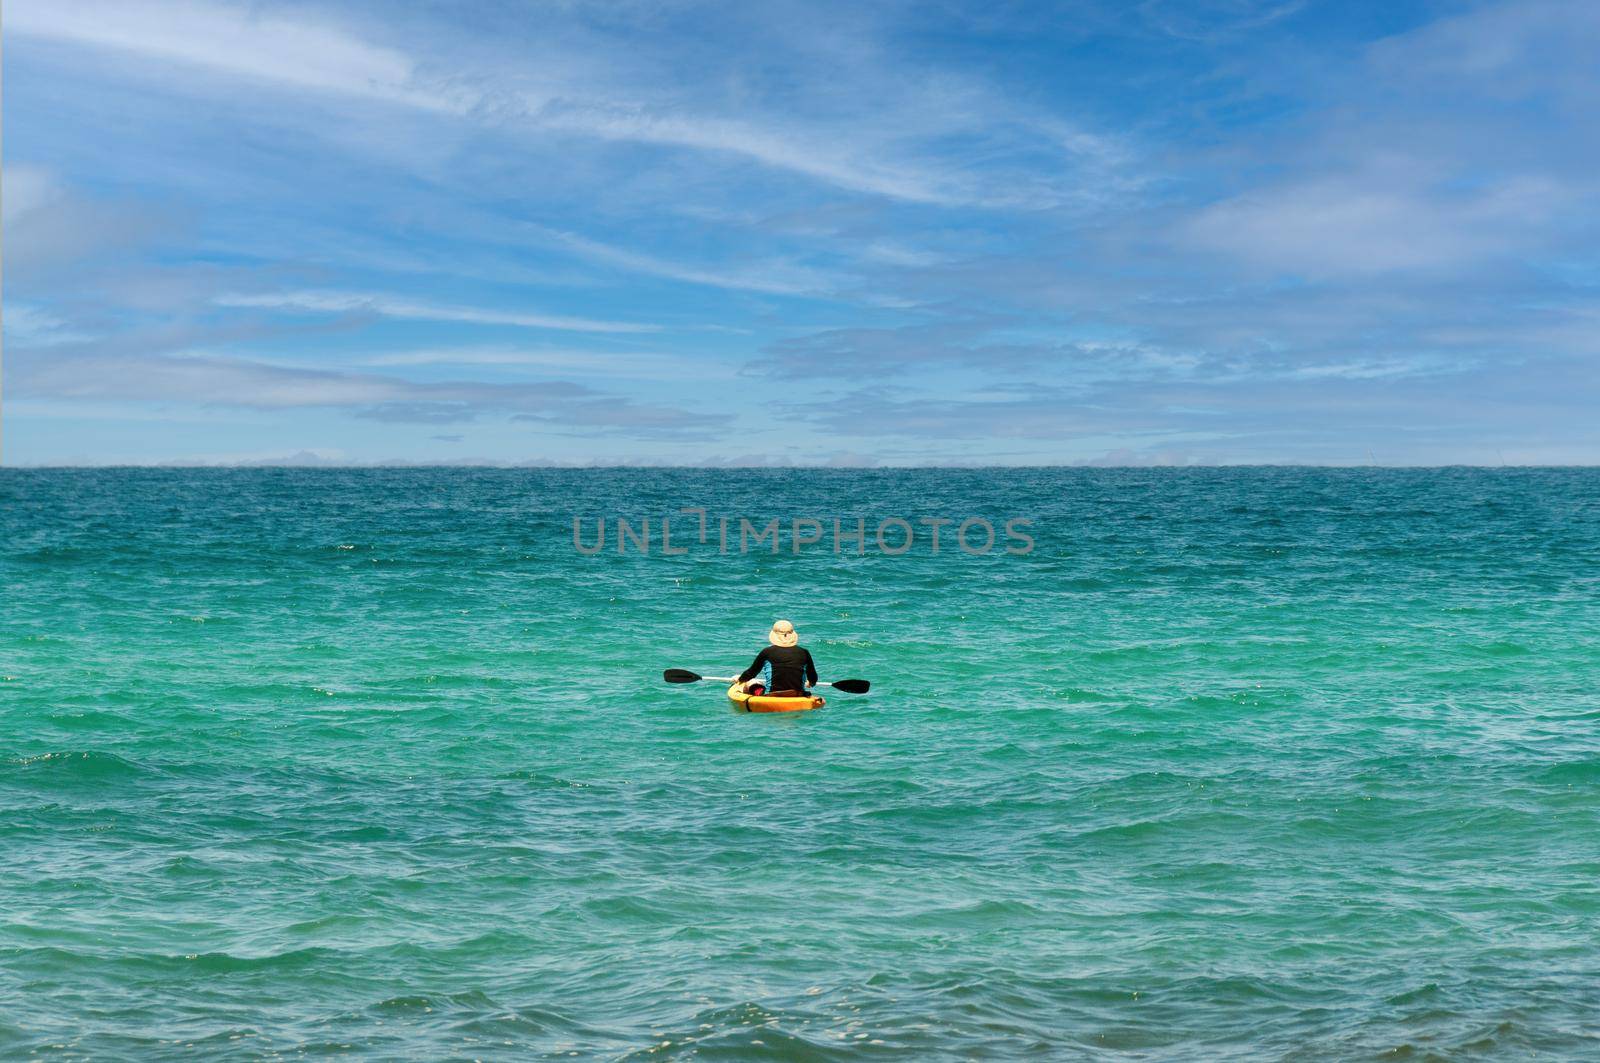 The guy sailed on a kayak into the open sea and sits in a kayak enjoying the scenery